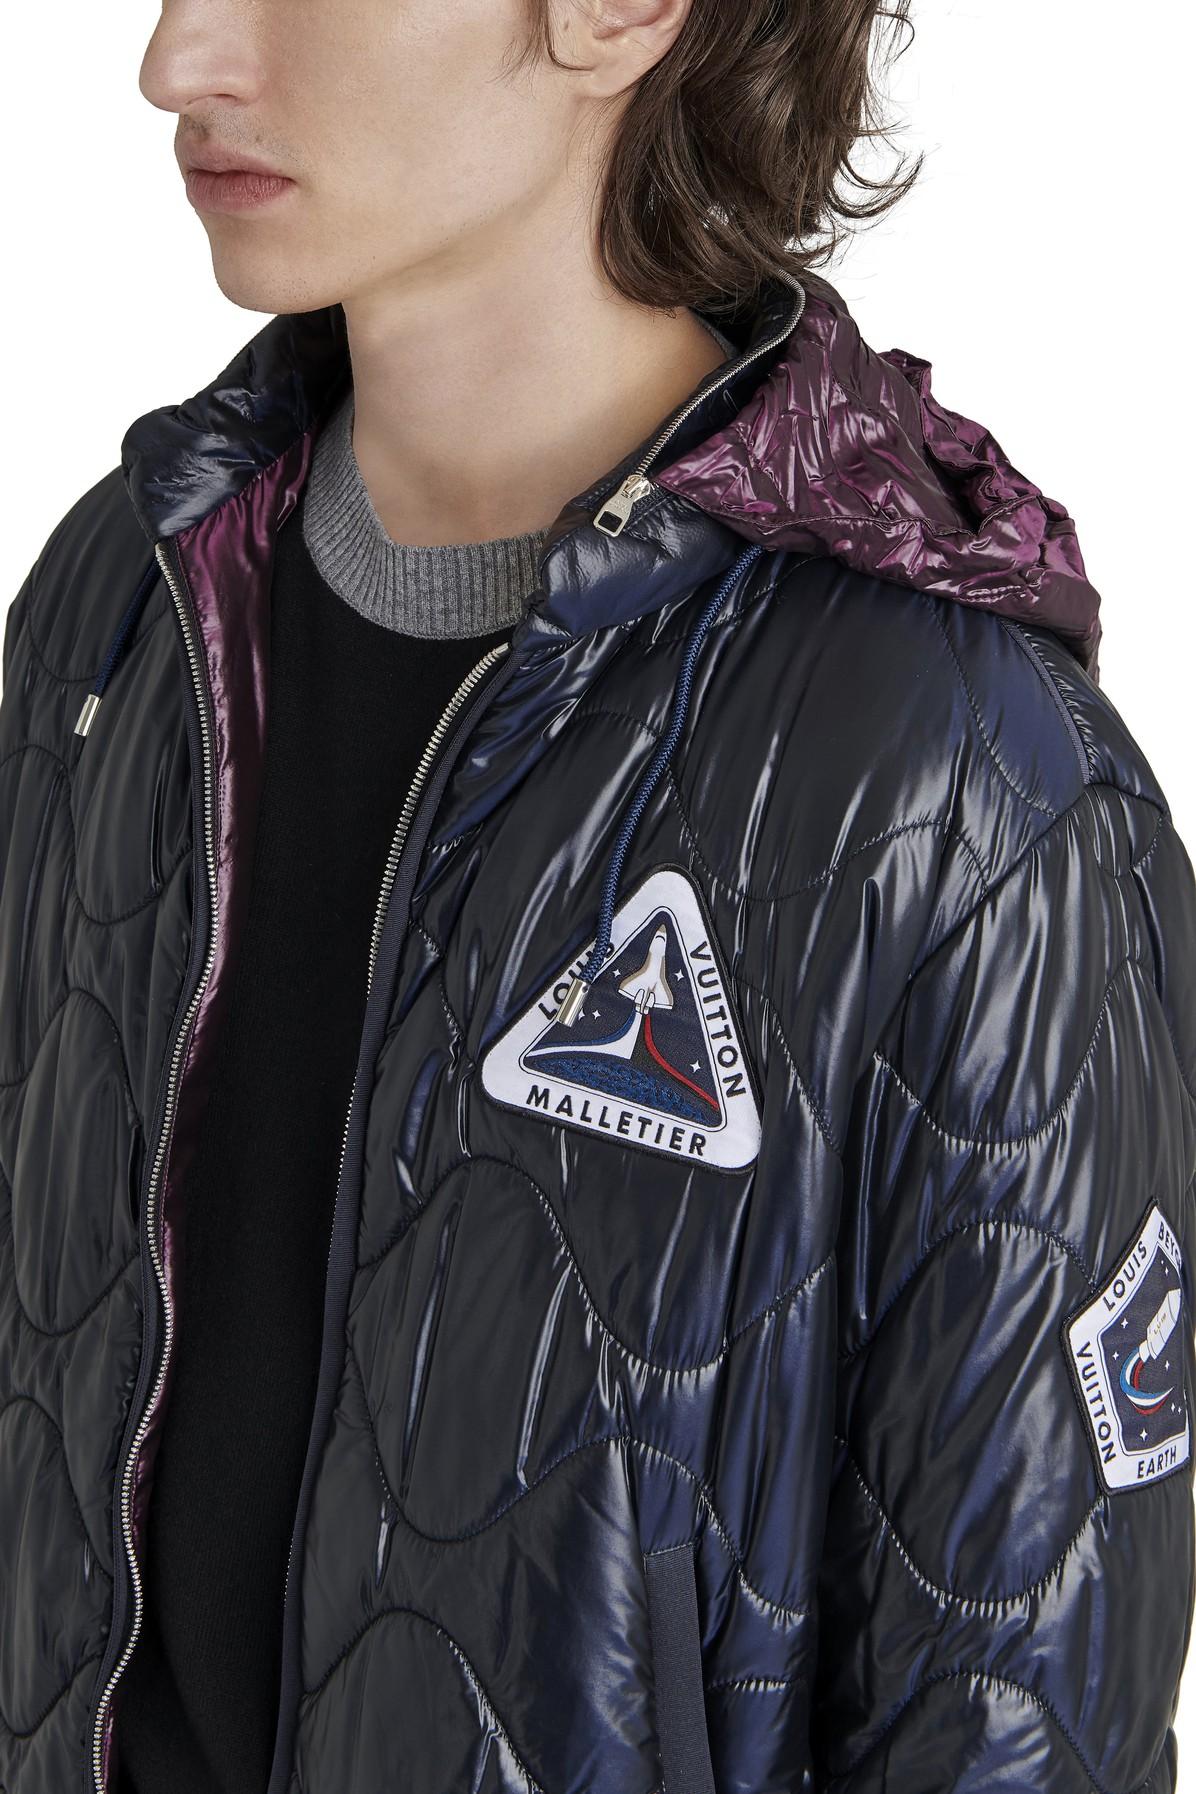 LV QUILTED PATCH SKI BLOUSON, Men's Fashion, Coats, Jackets and